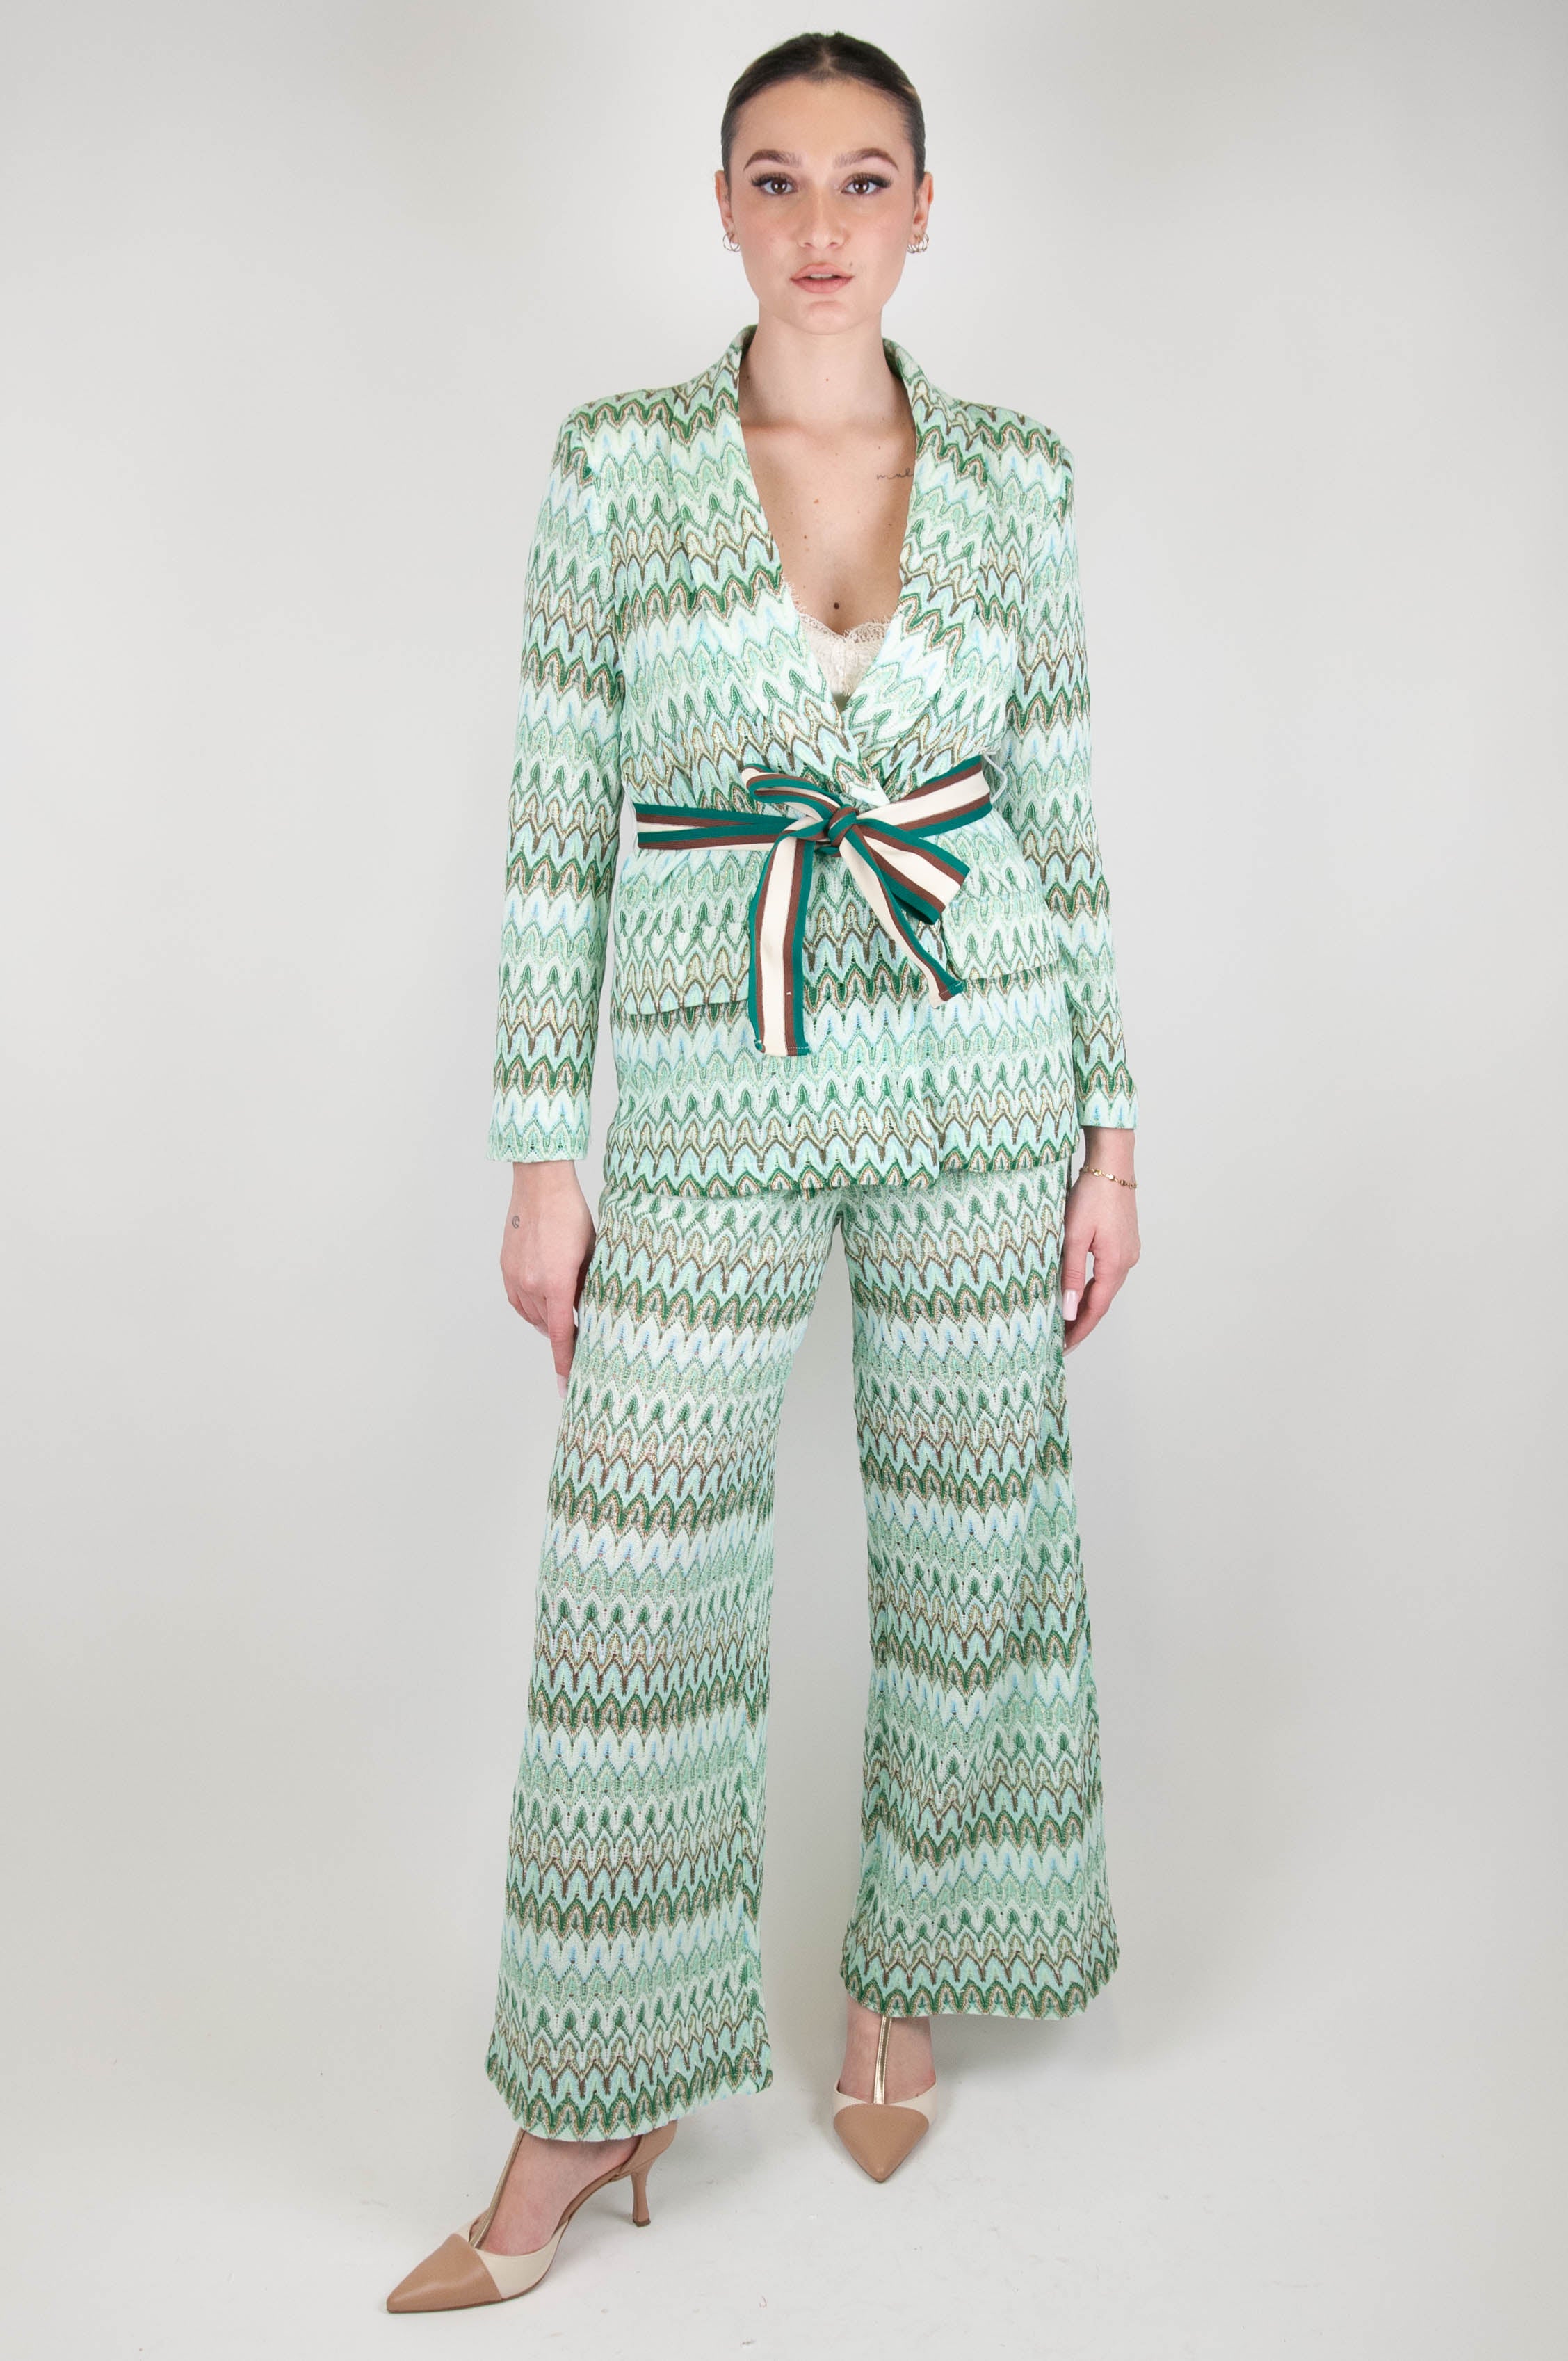 Tension in - Zig zag patterned palazzo trousers with drawstring